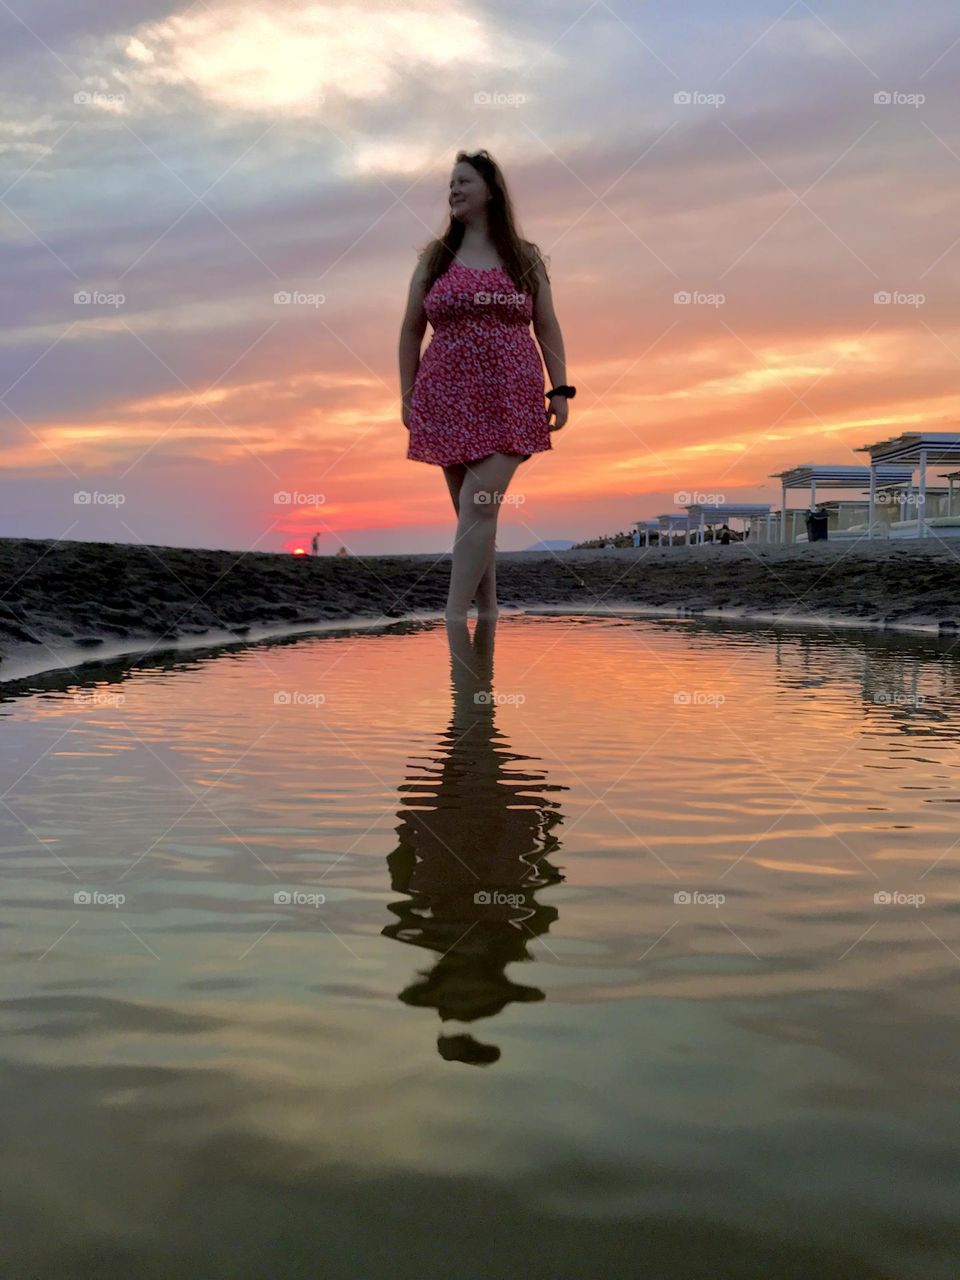 Reflection of a young girl during the sunset